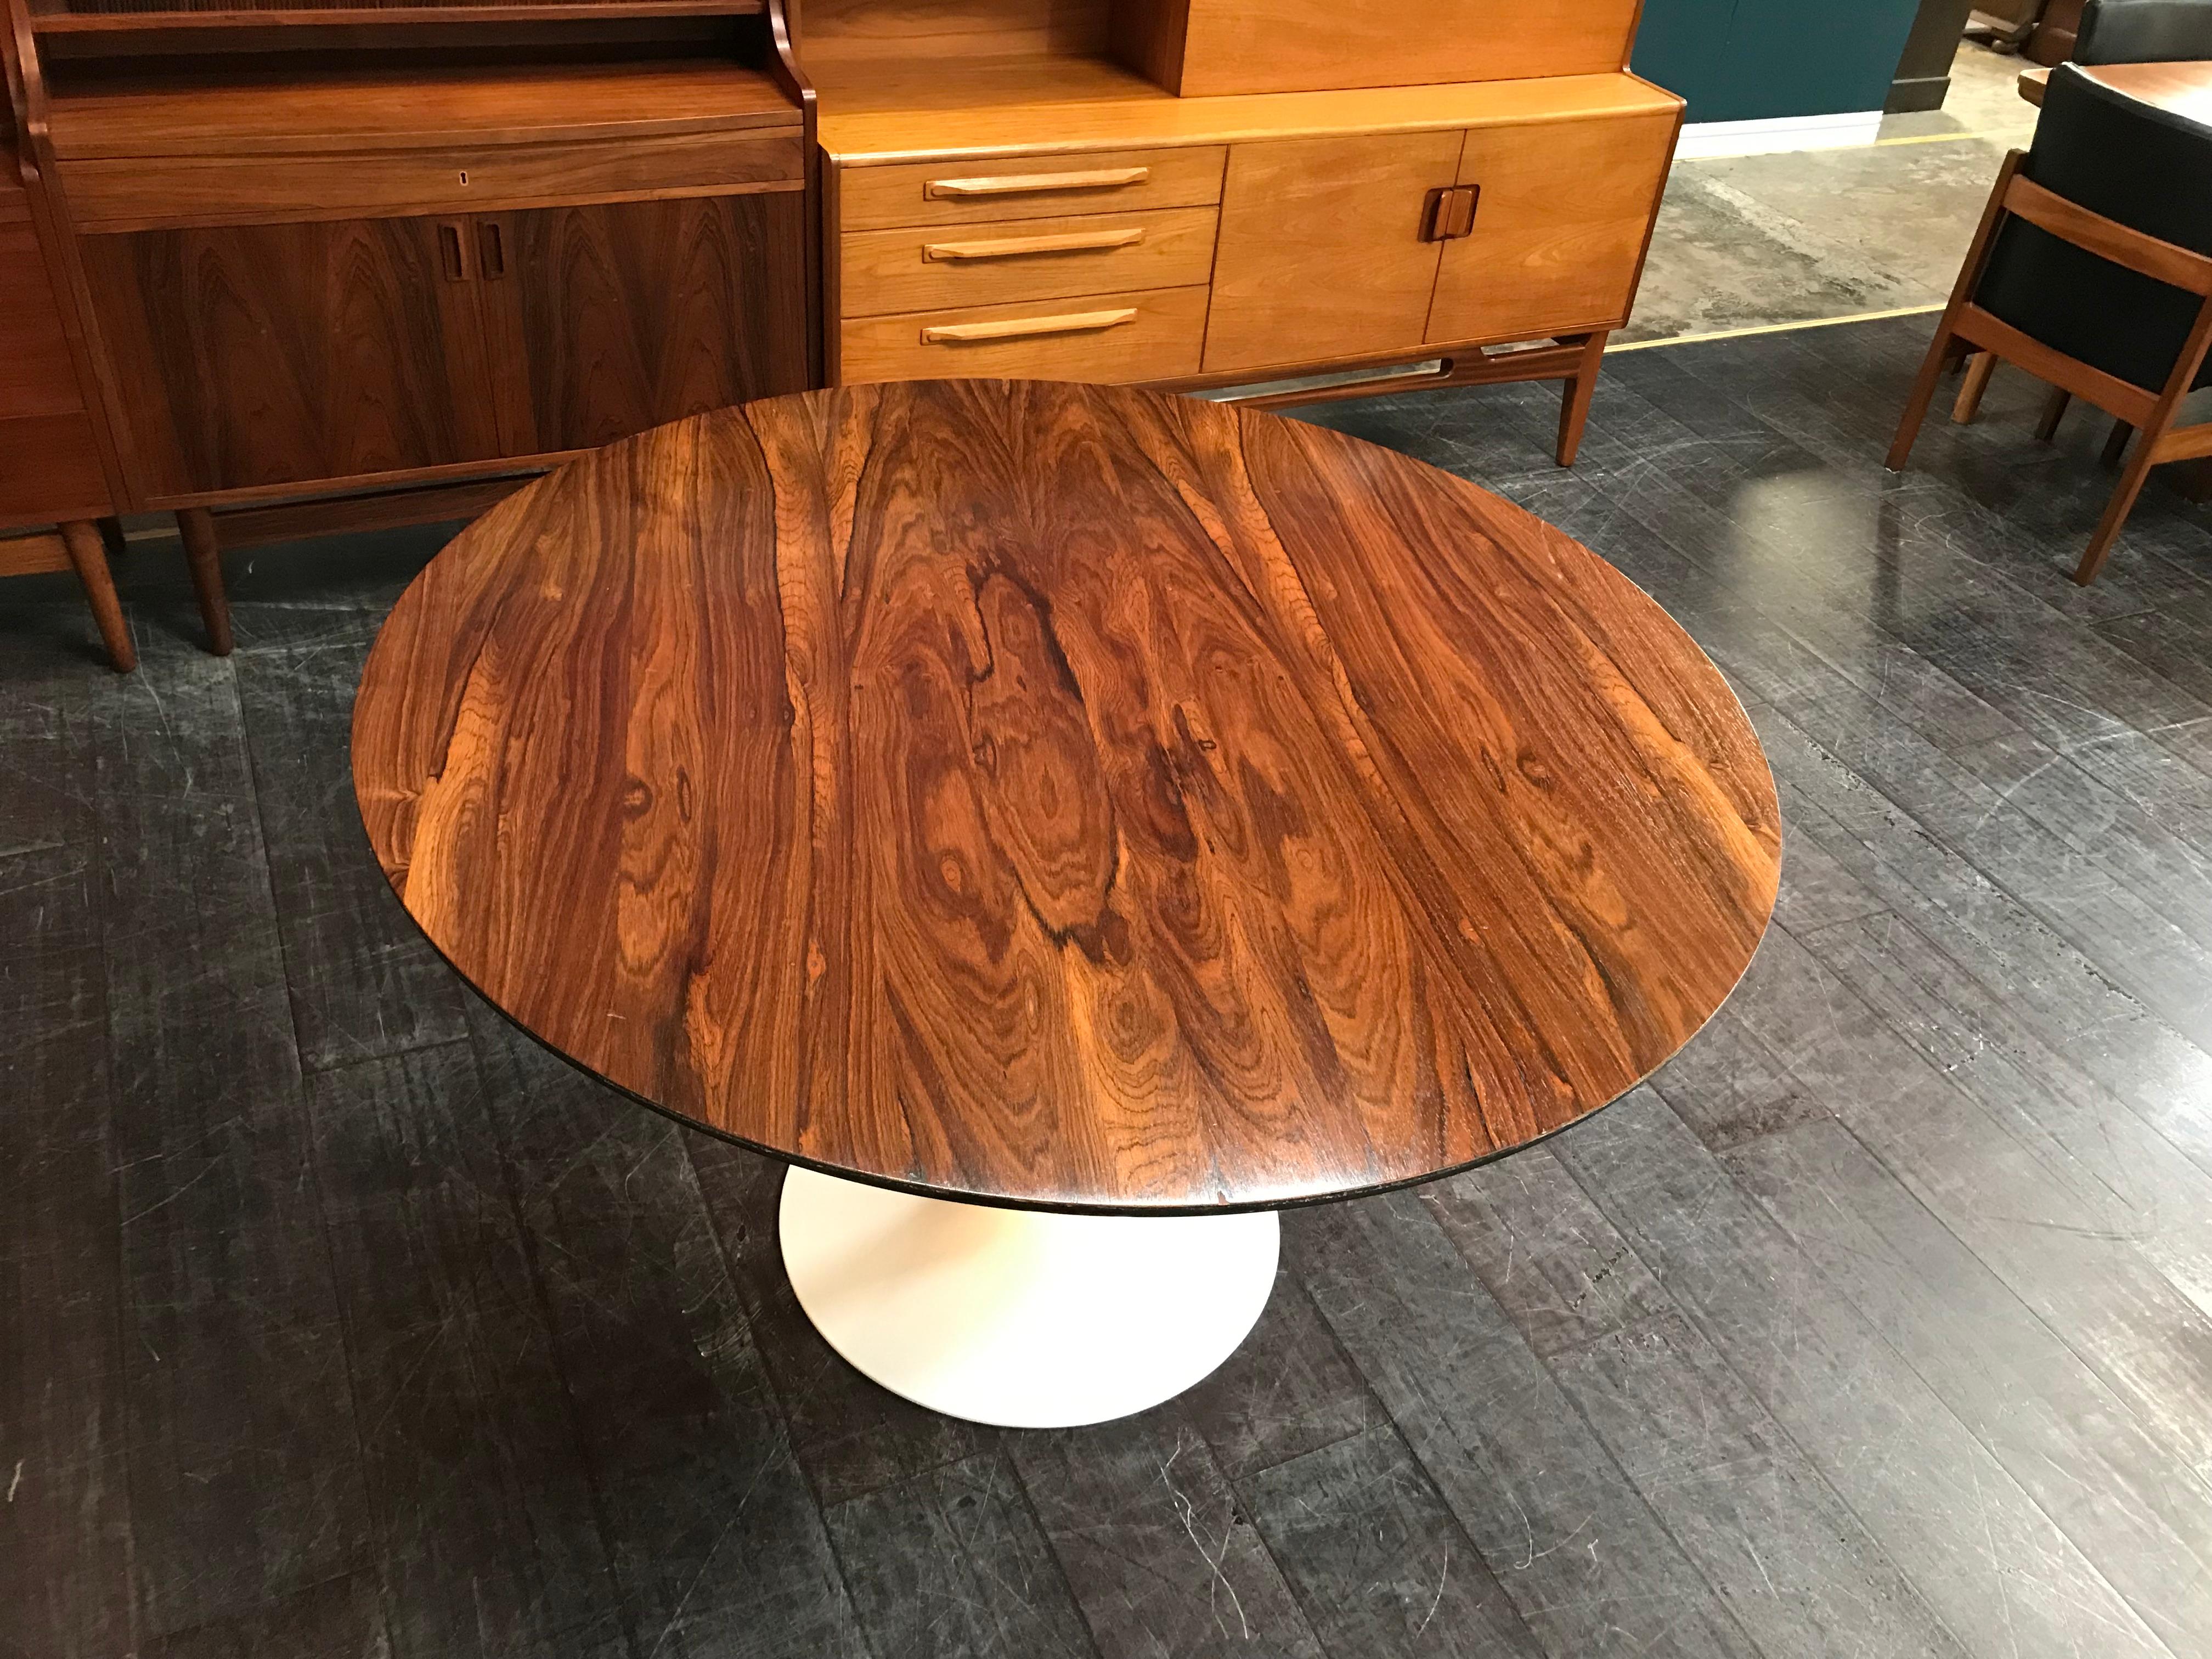 British Midcentury Rosewood Tulip Dining Table by Maurice Burke for Arkana For Sale